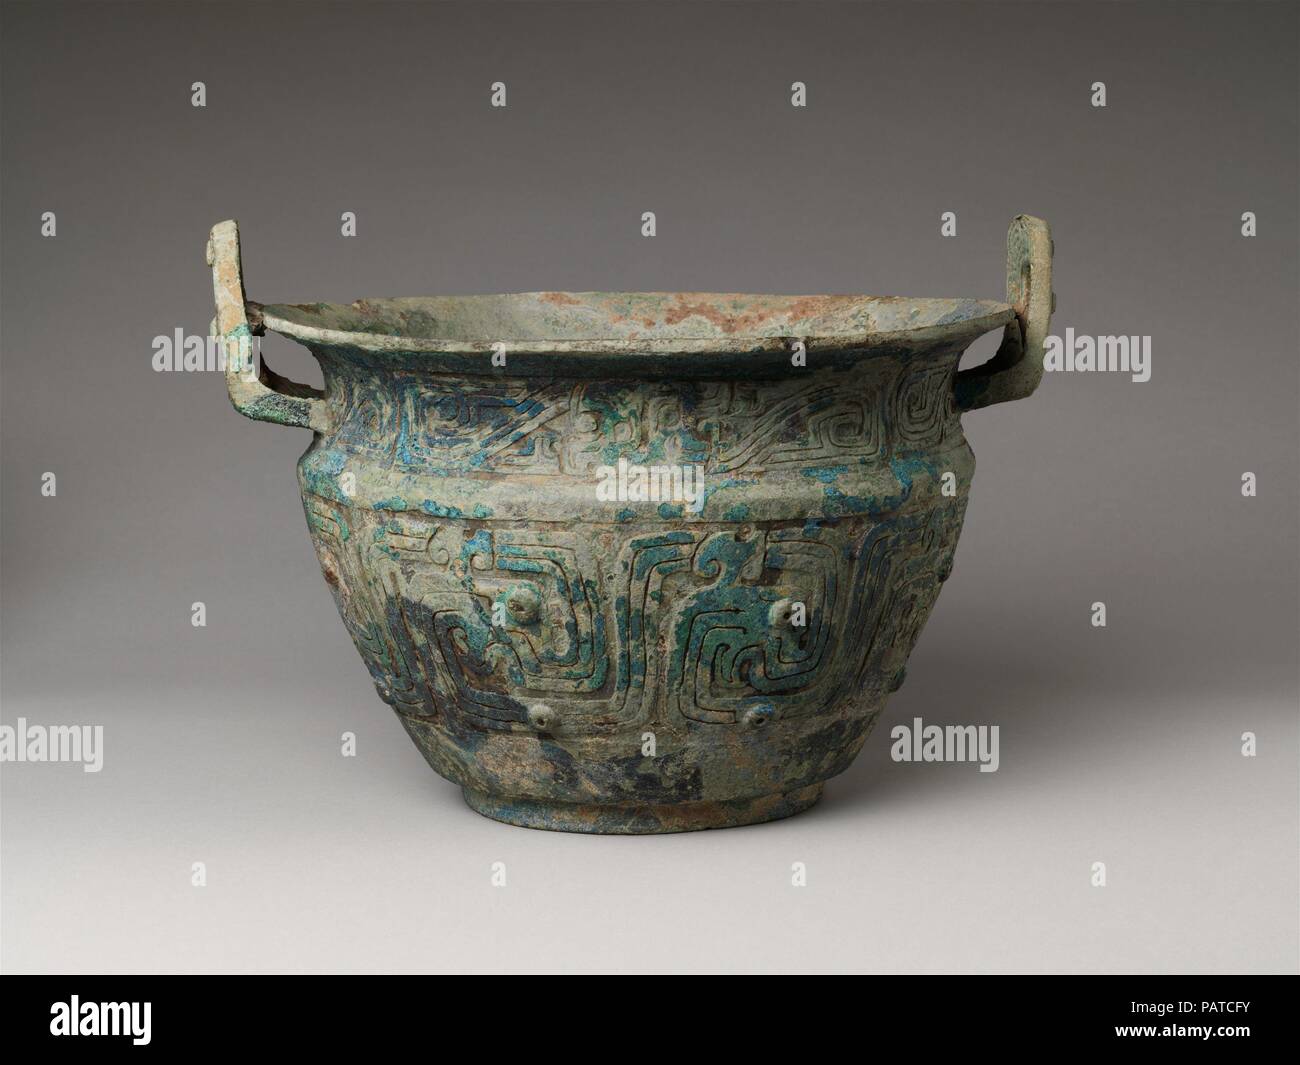 Part of a Steamer (Zeng). Culture: China. Dimensions: H. 9 1/4 in. (23.5 cm); W. at handles 13 5/8 in. (34.6 cm); Diam. of rim 12 1/4 in. (31.1 cm). Date: late 9th-early 8th century B.C.. Museum: Metropolitan Museum of Art, New York, USA. Stock Photo